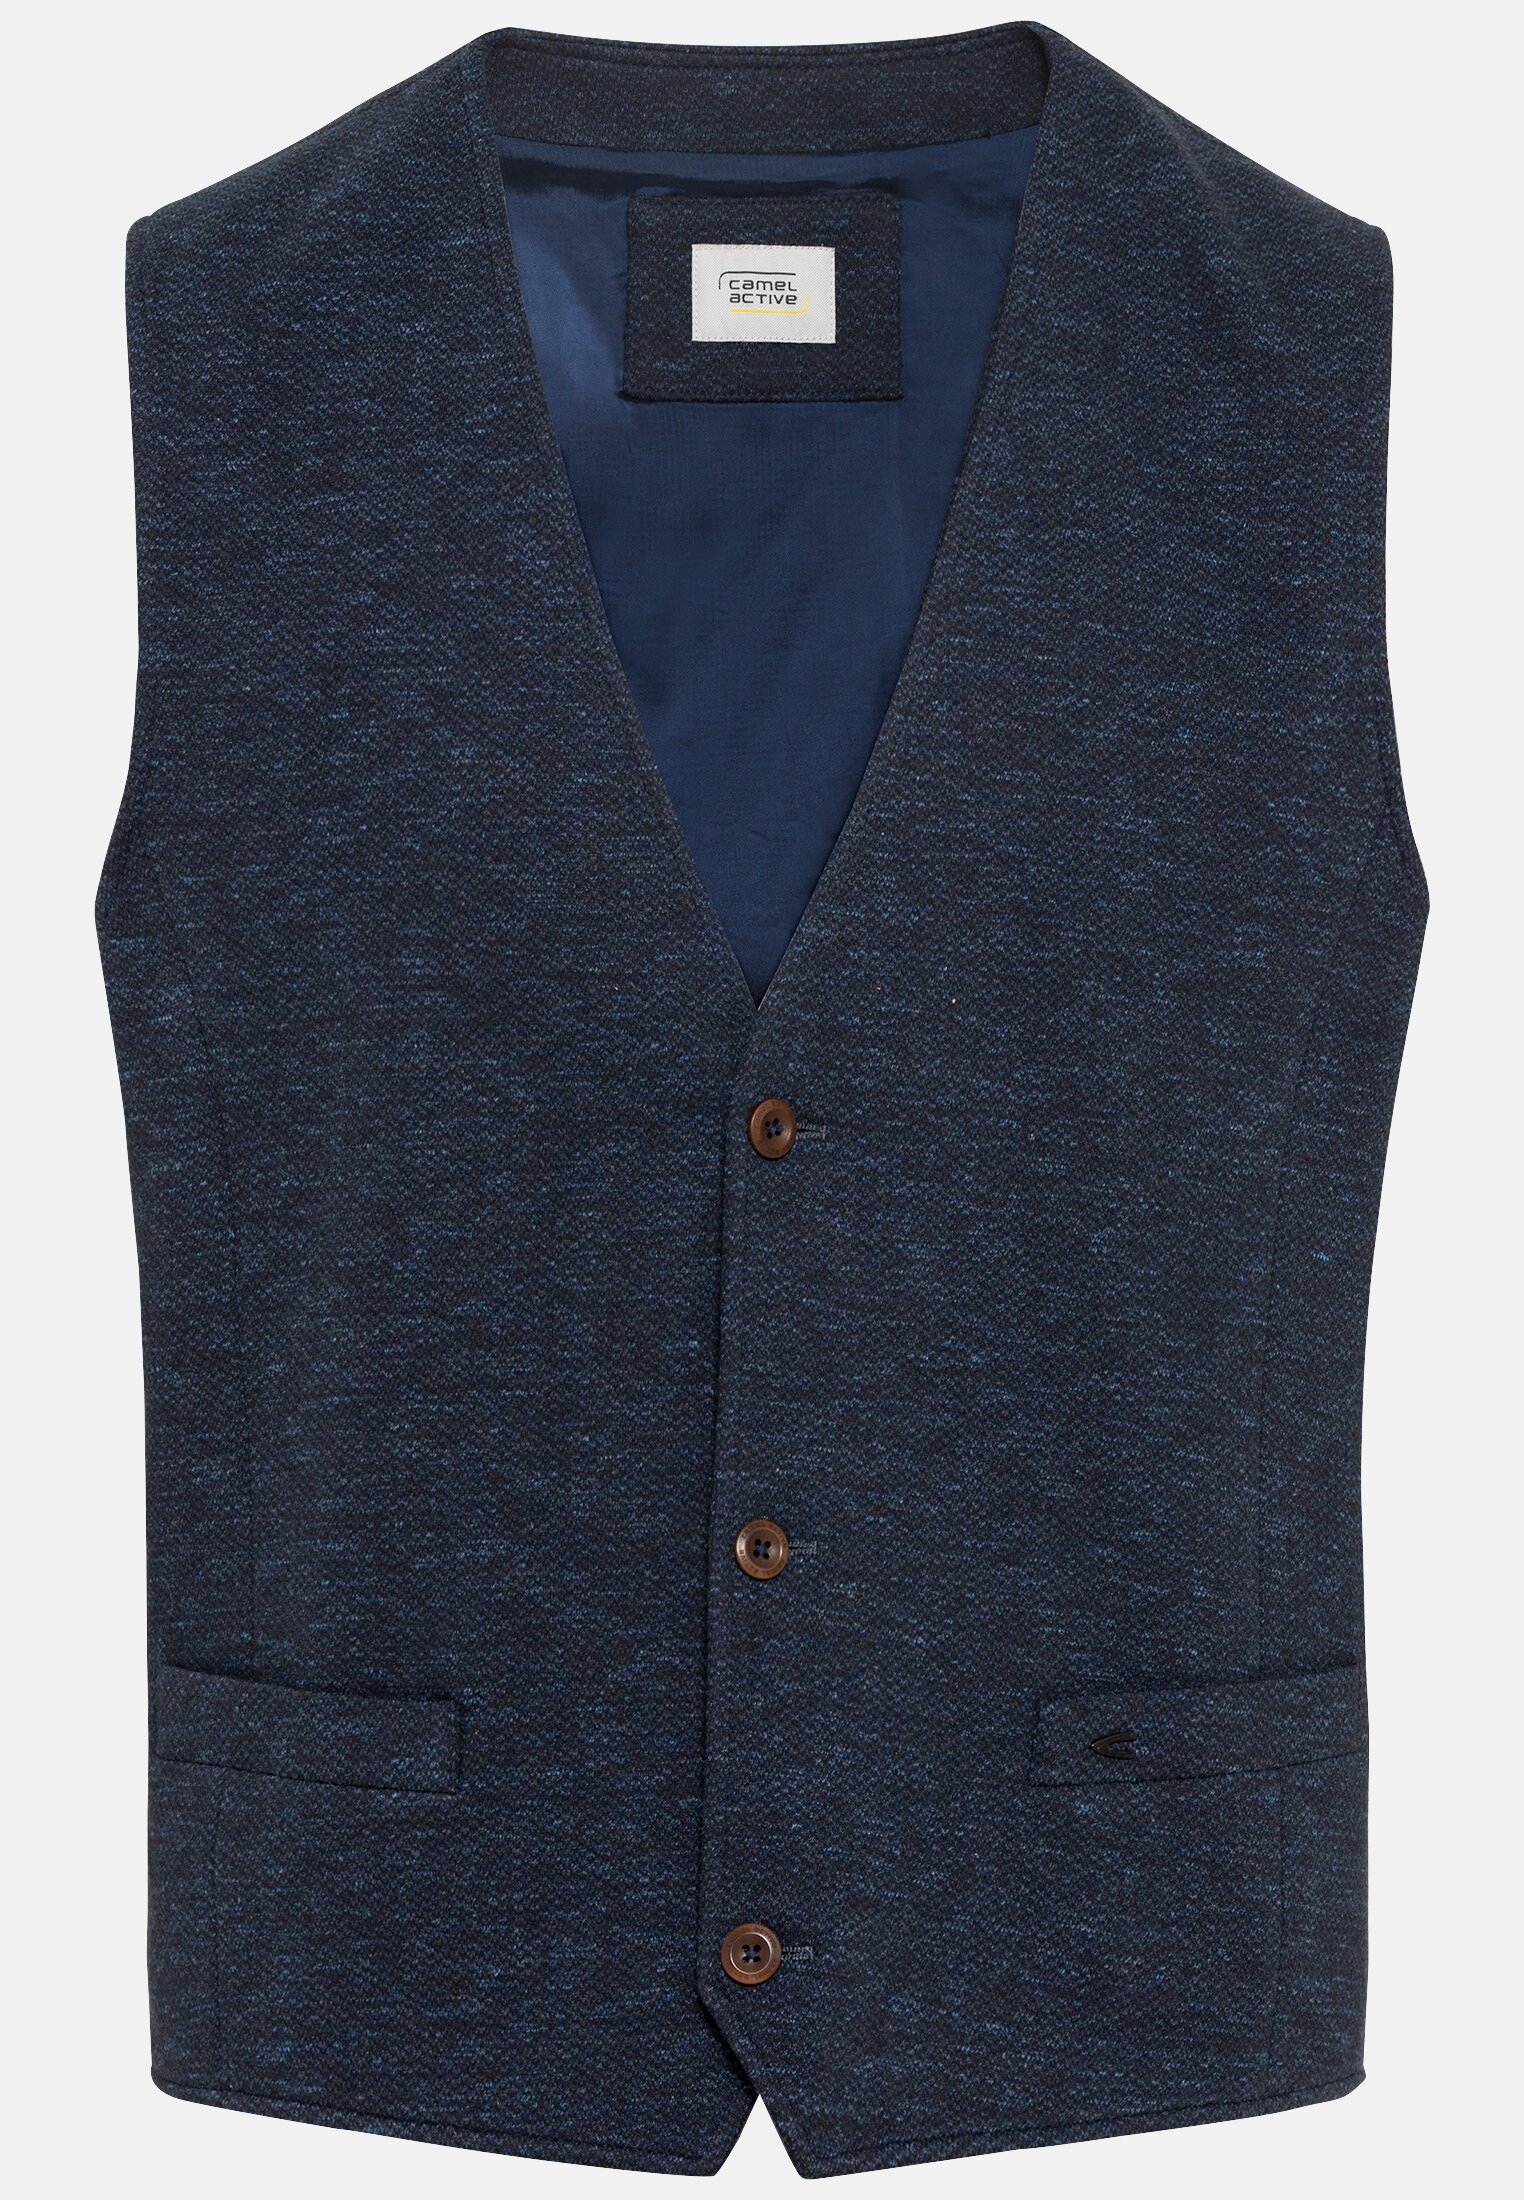 Camel Active Waistcoat in jersey structure